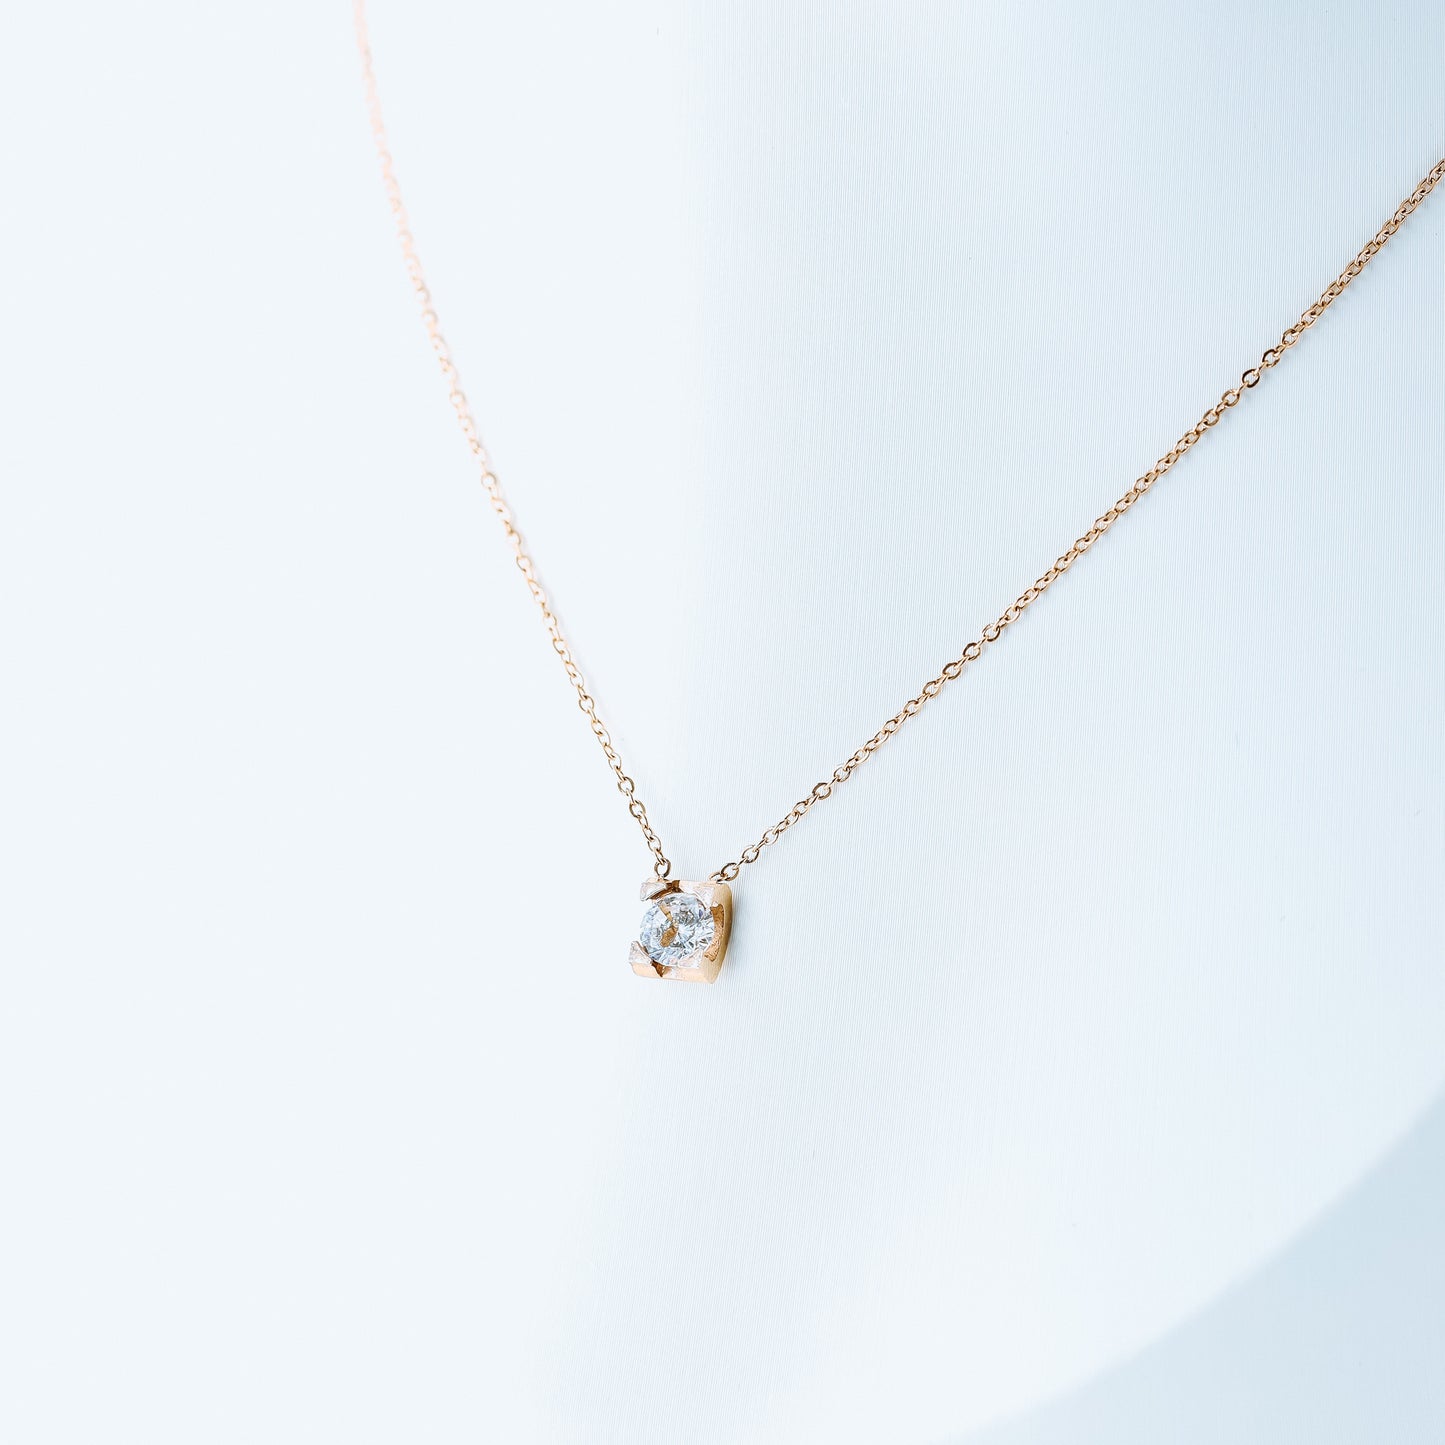 Dainty Diamond Necklace • Floating Diamond Solitaire Necklace • Minimalist Jewelry • Bridesmaid Necklace • Gift for Her • BYSDMJEWELS